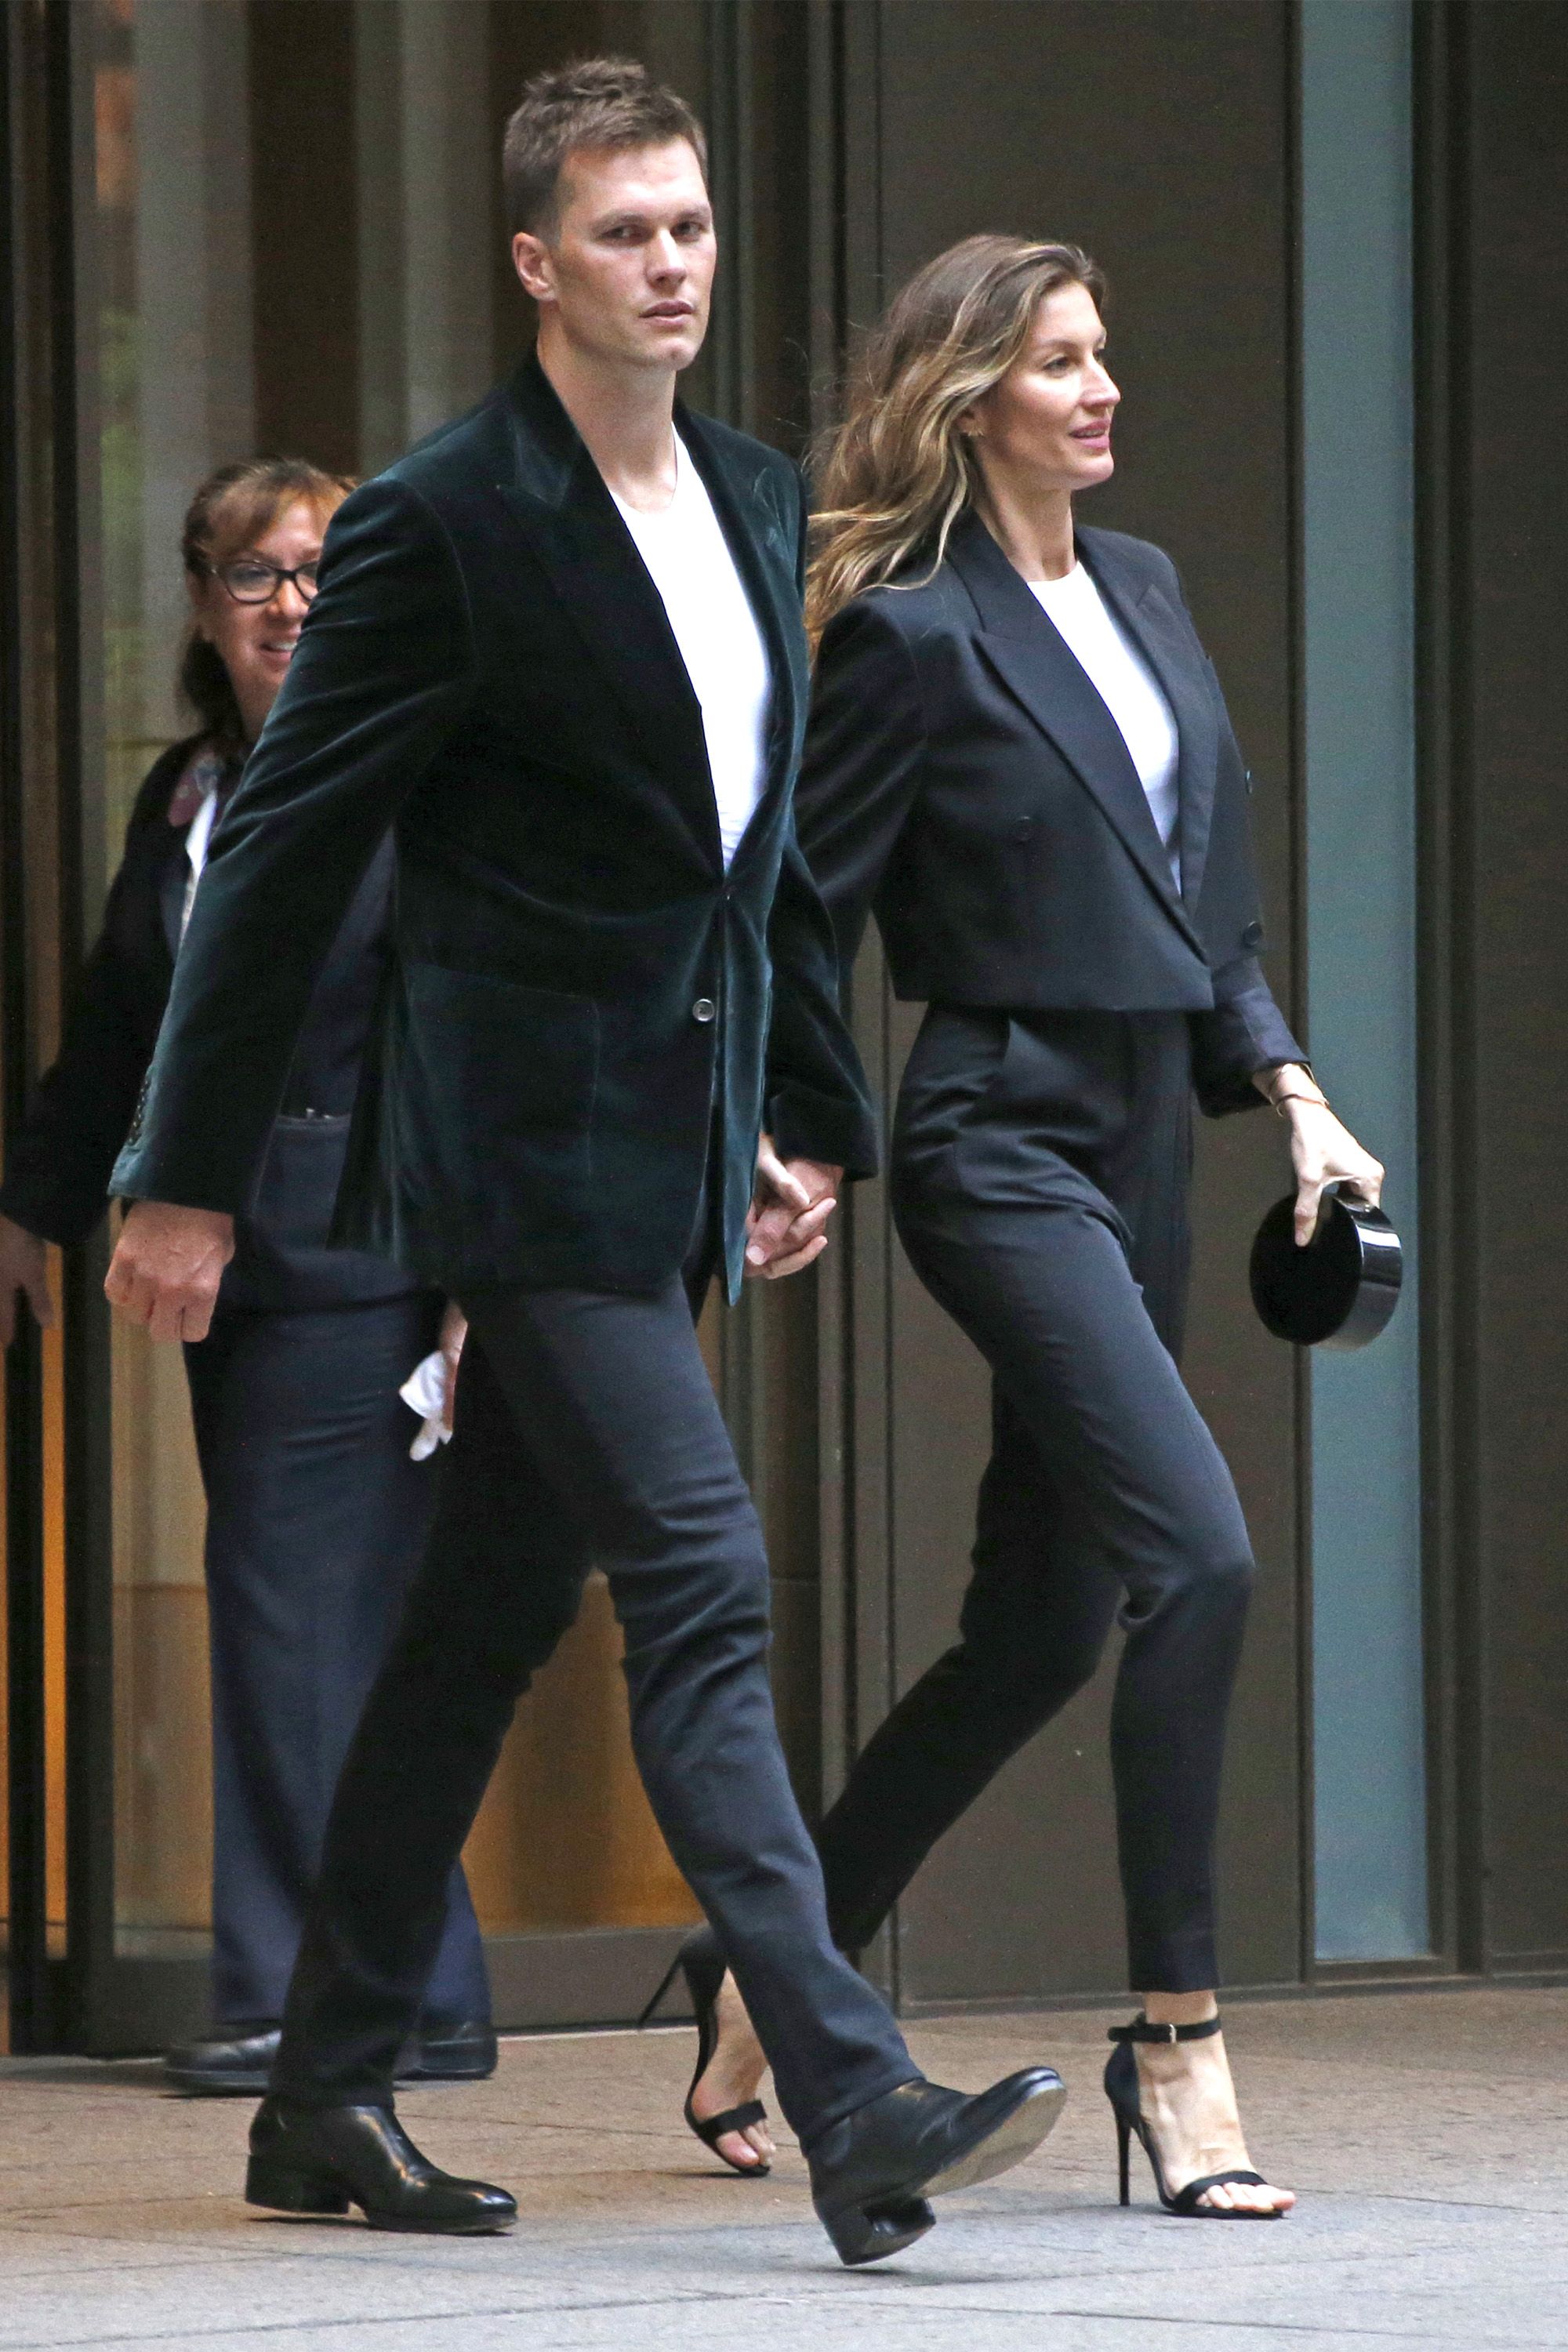 Gisele and Tom Brady Are Twinning in Matching Suits